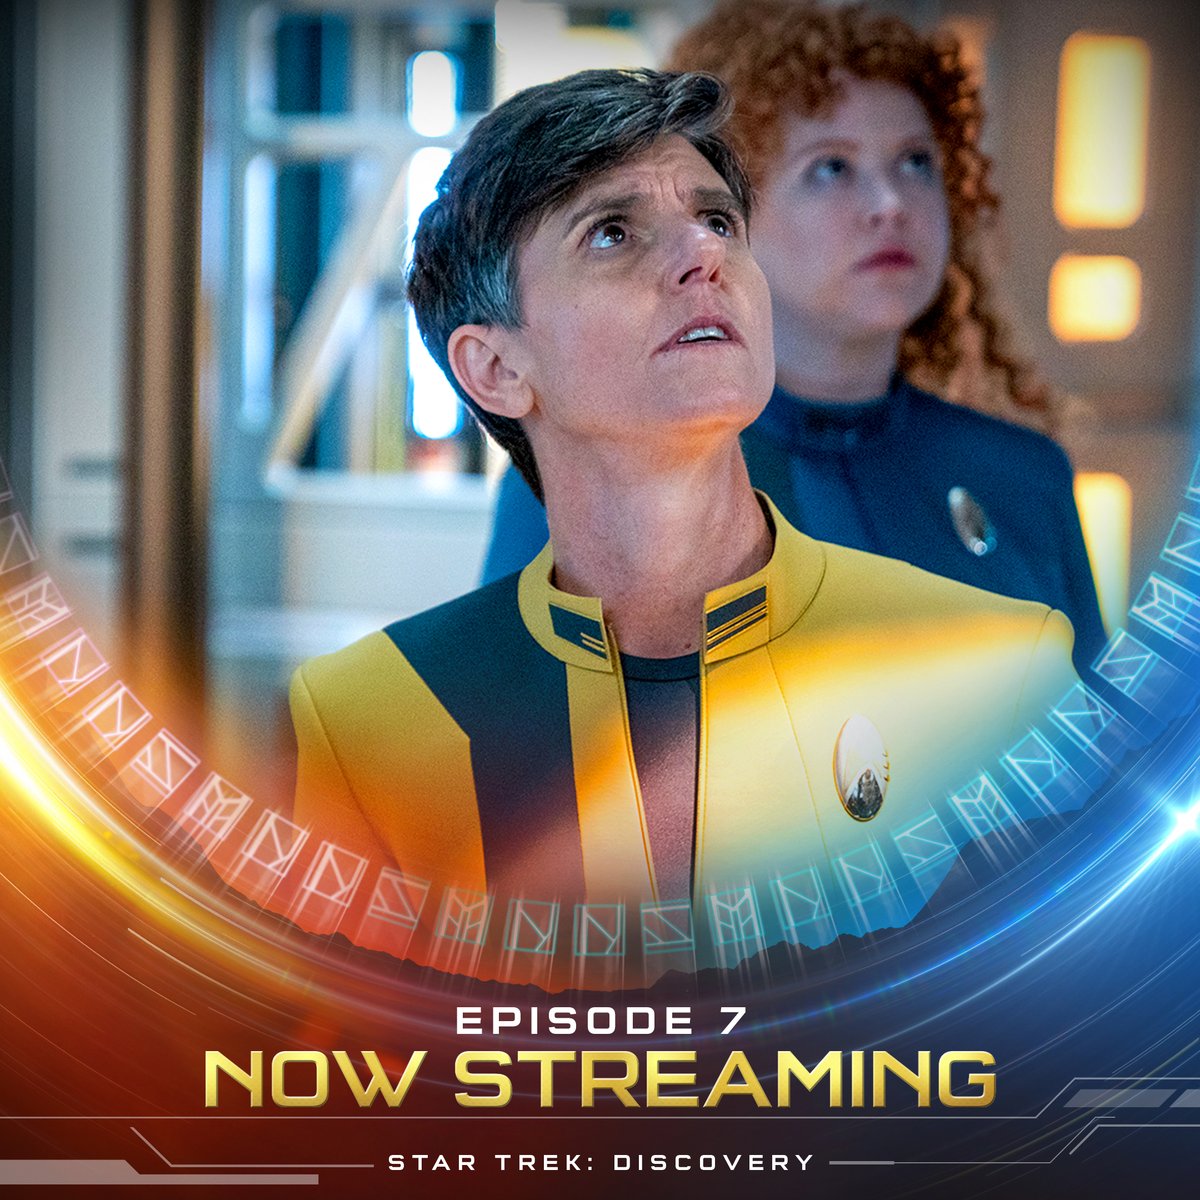 The odds are better with Jett Reno on your crew. Stream the new episode of #StarTrekDiscovery on @ParamountPlus today!